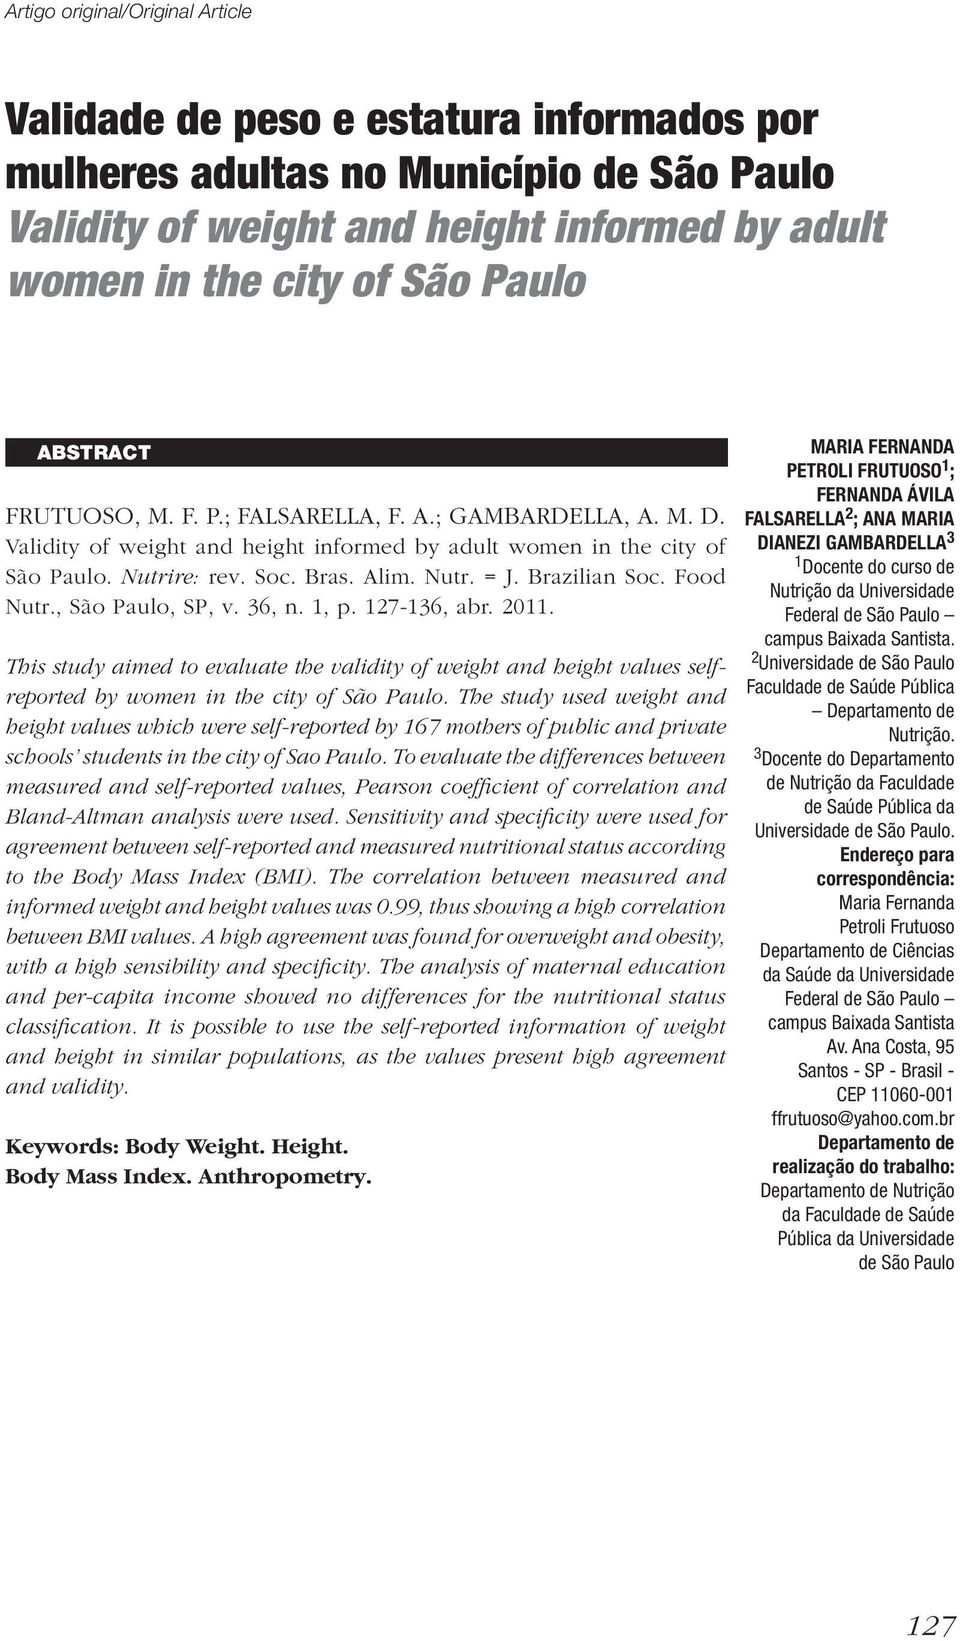 Brazilian Soc. Food Nutr., São Paulo, SP, v. 36, n. 1, p. 127-136, abr. 2011. This study aimed to evaluate the validity of weight and height values selfreported by women in the city of São Paulo.